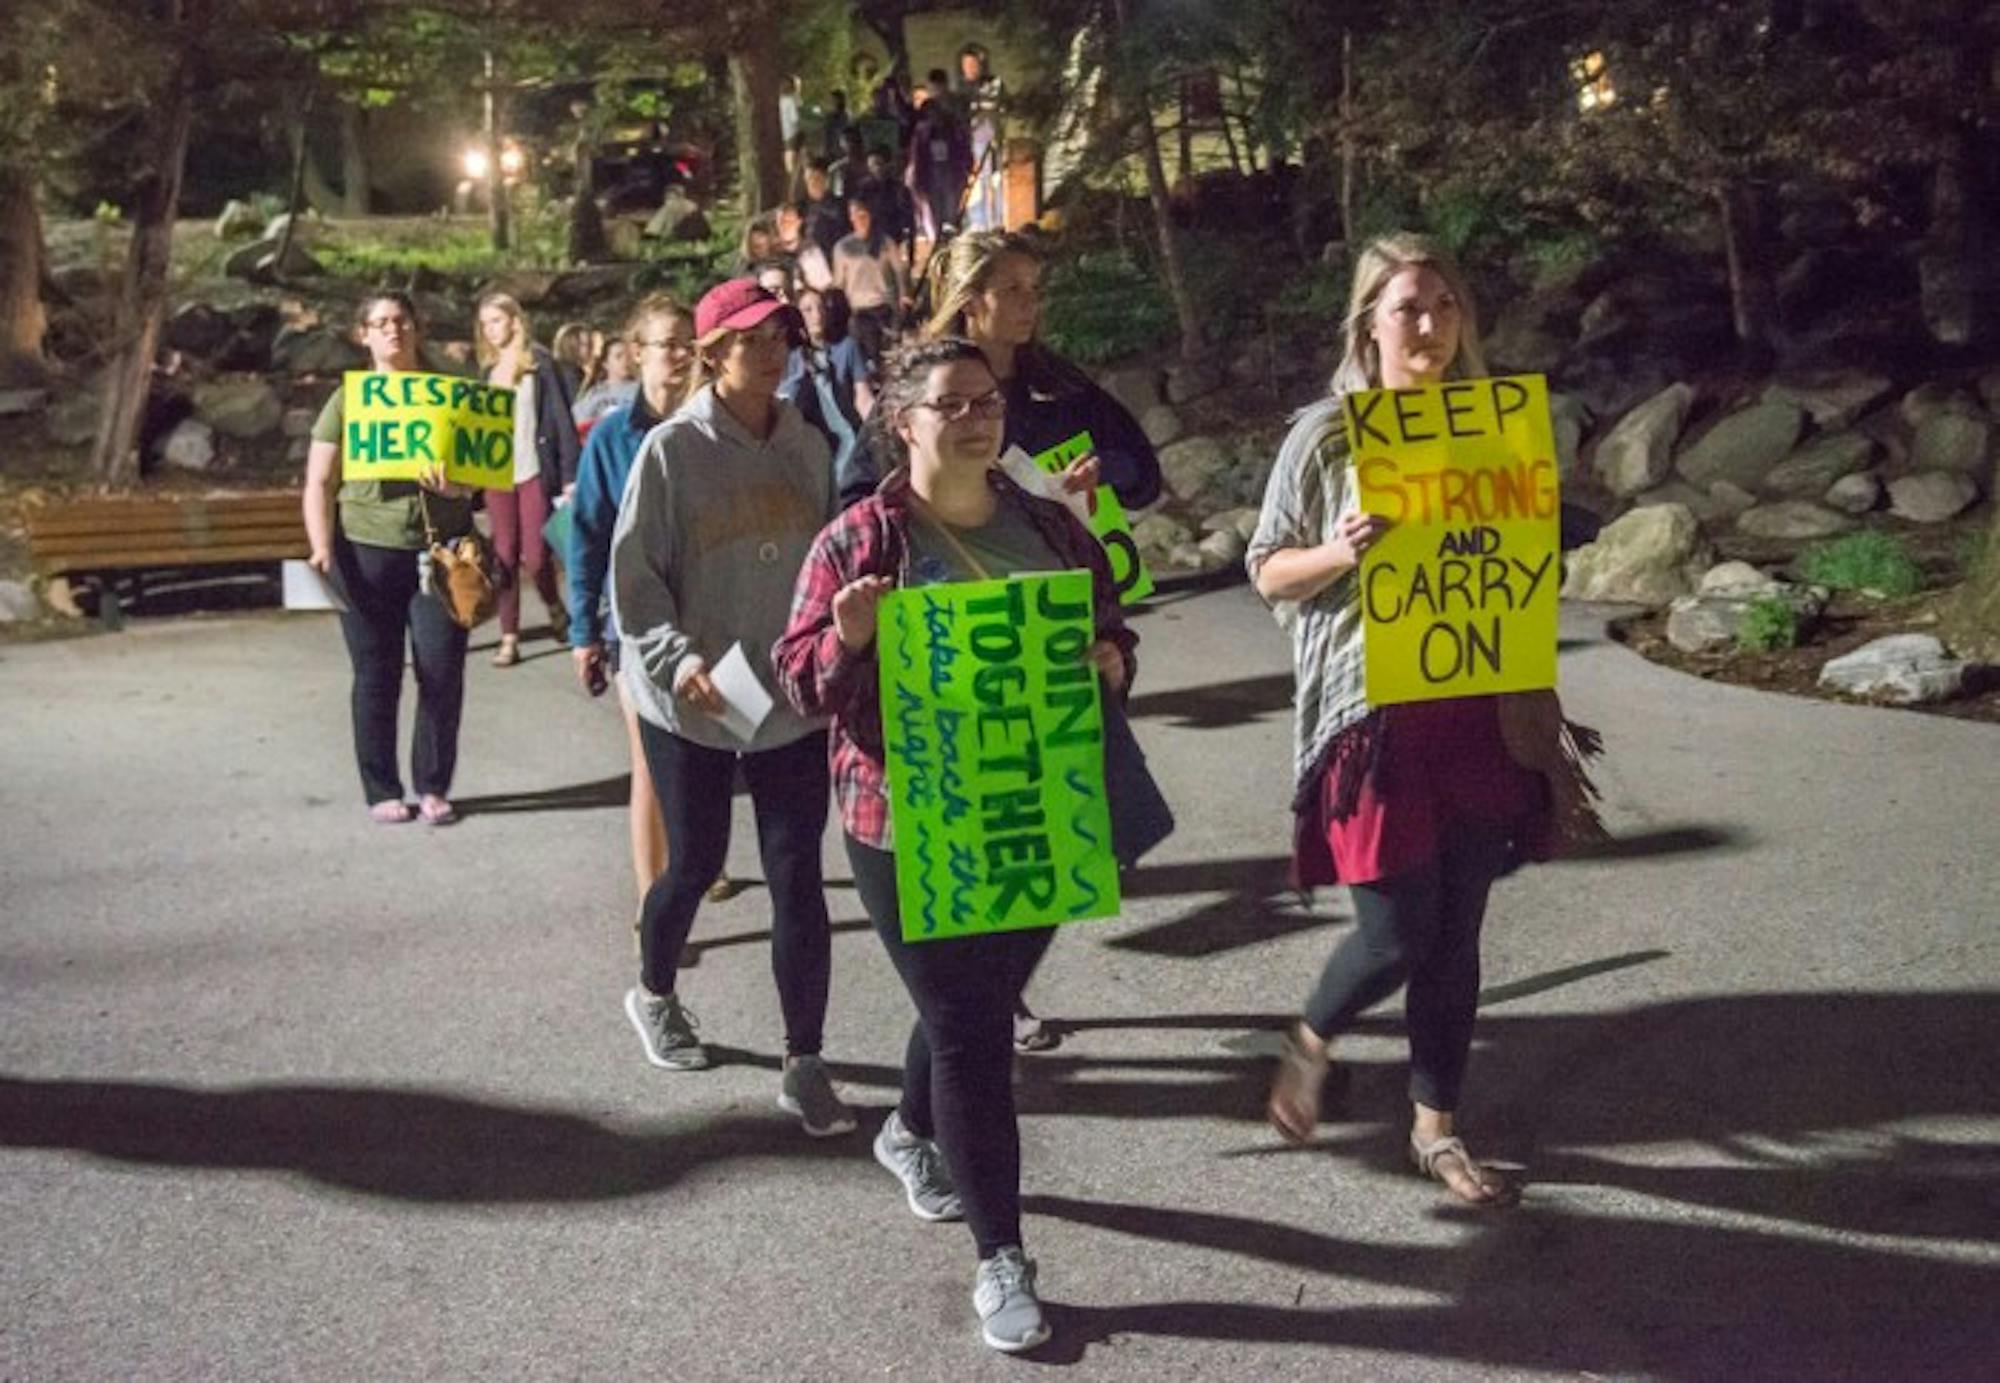 Students from Notre Dame and Saint Mary's complete a march throughout the College and University campuses at the Grotto.